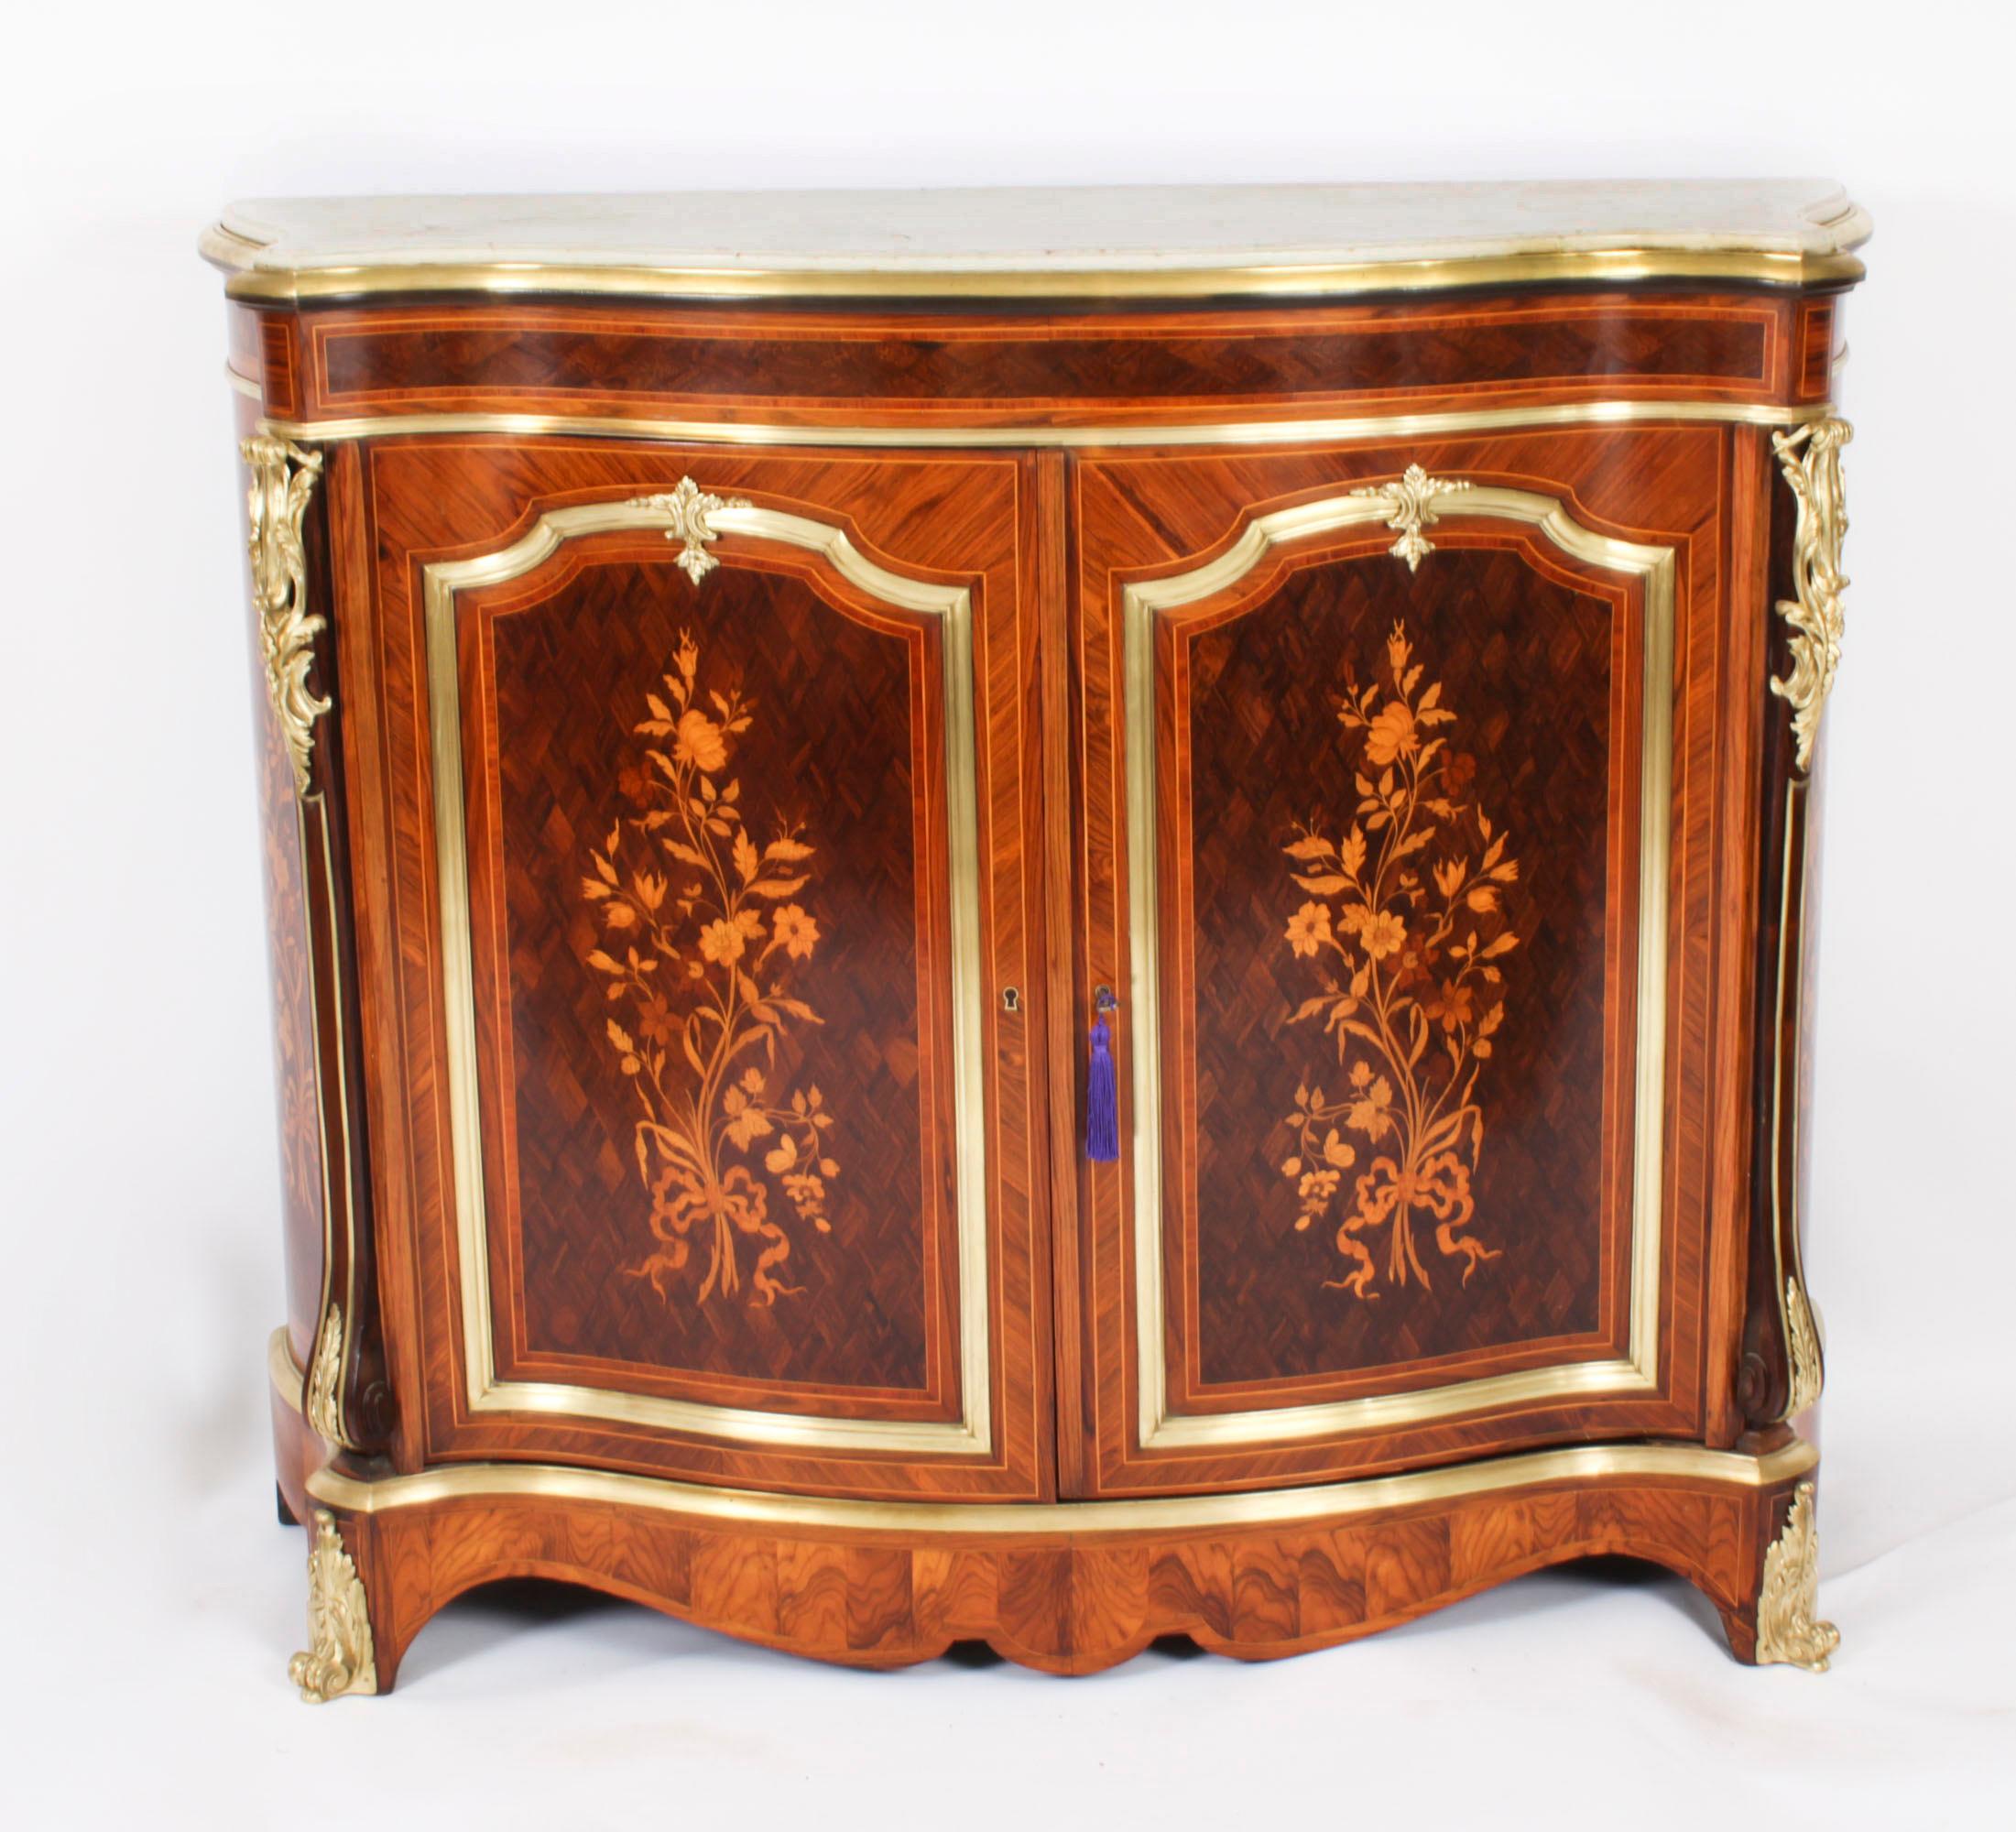 This is a superb and imposing antique French serpentine ormolu mounted, purple heart, walnut, marquetry and  marble topped side cabinet, C 1880 in date.

The entire piece highlights the unique and truly exceptional pattern of the floral marquetry